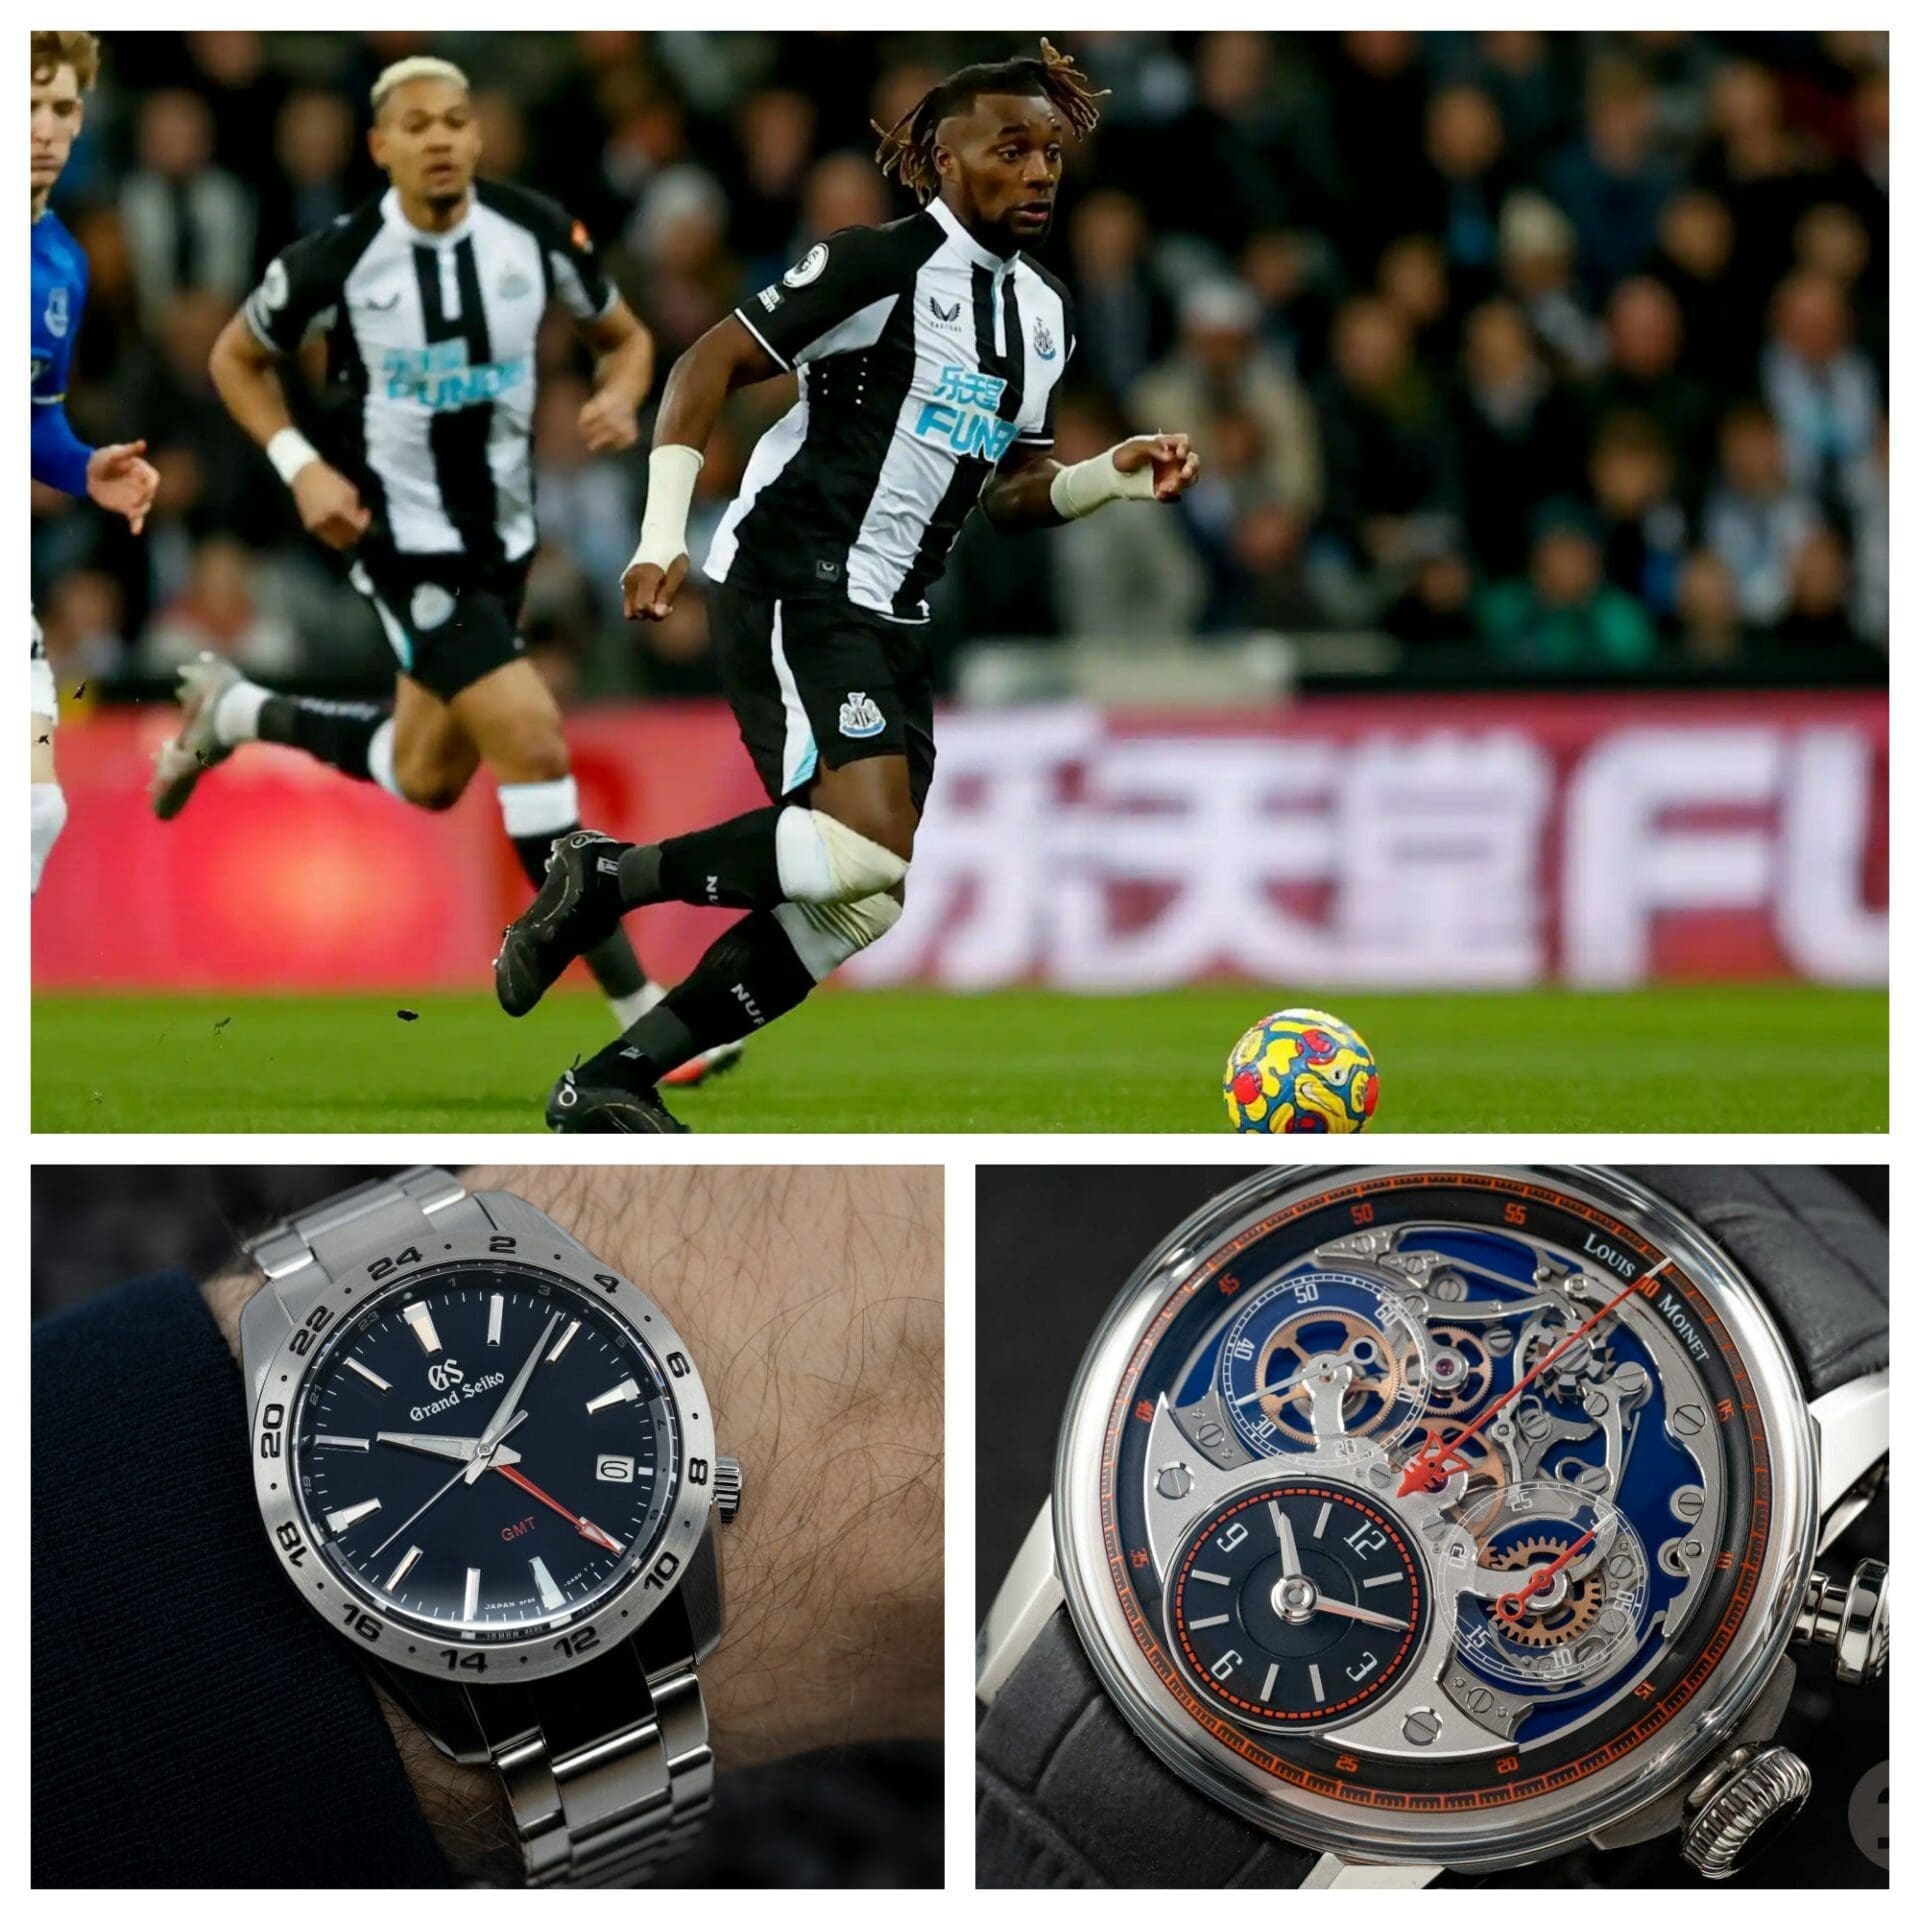 FRIDAY WIND DOWN: New Grand Seiko 9F GMTs, gift-giving footballers and Louis Monet x Fratello